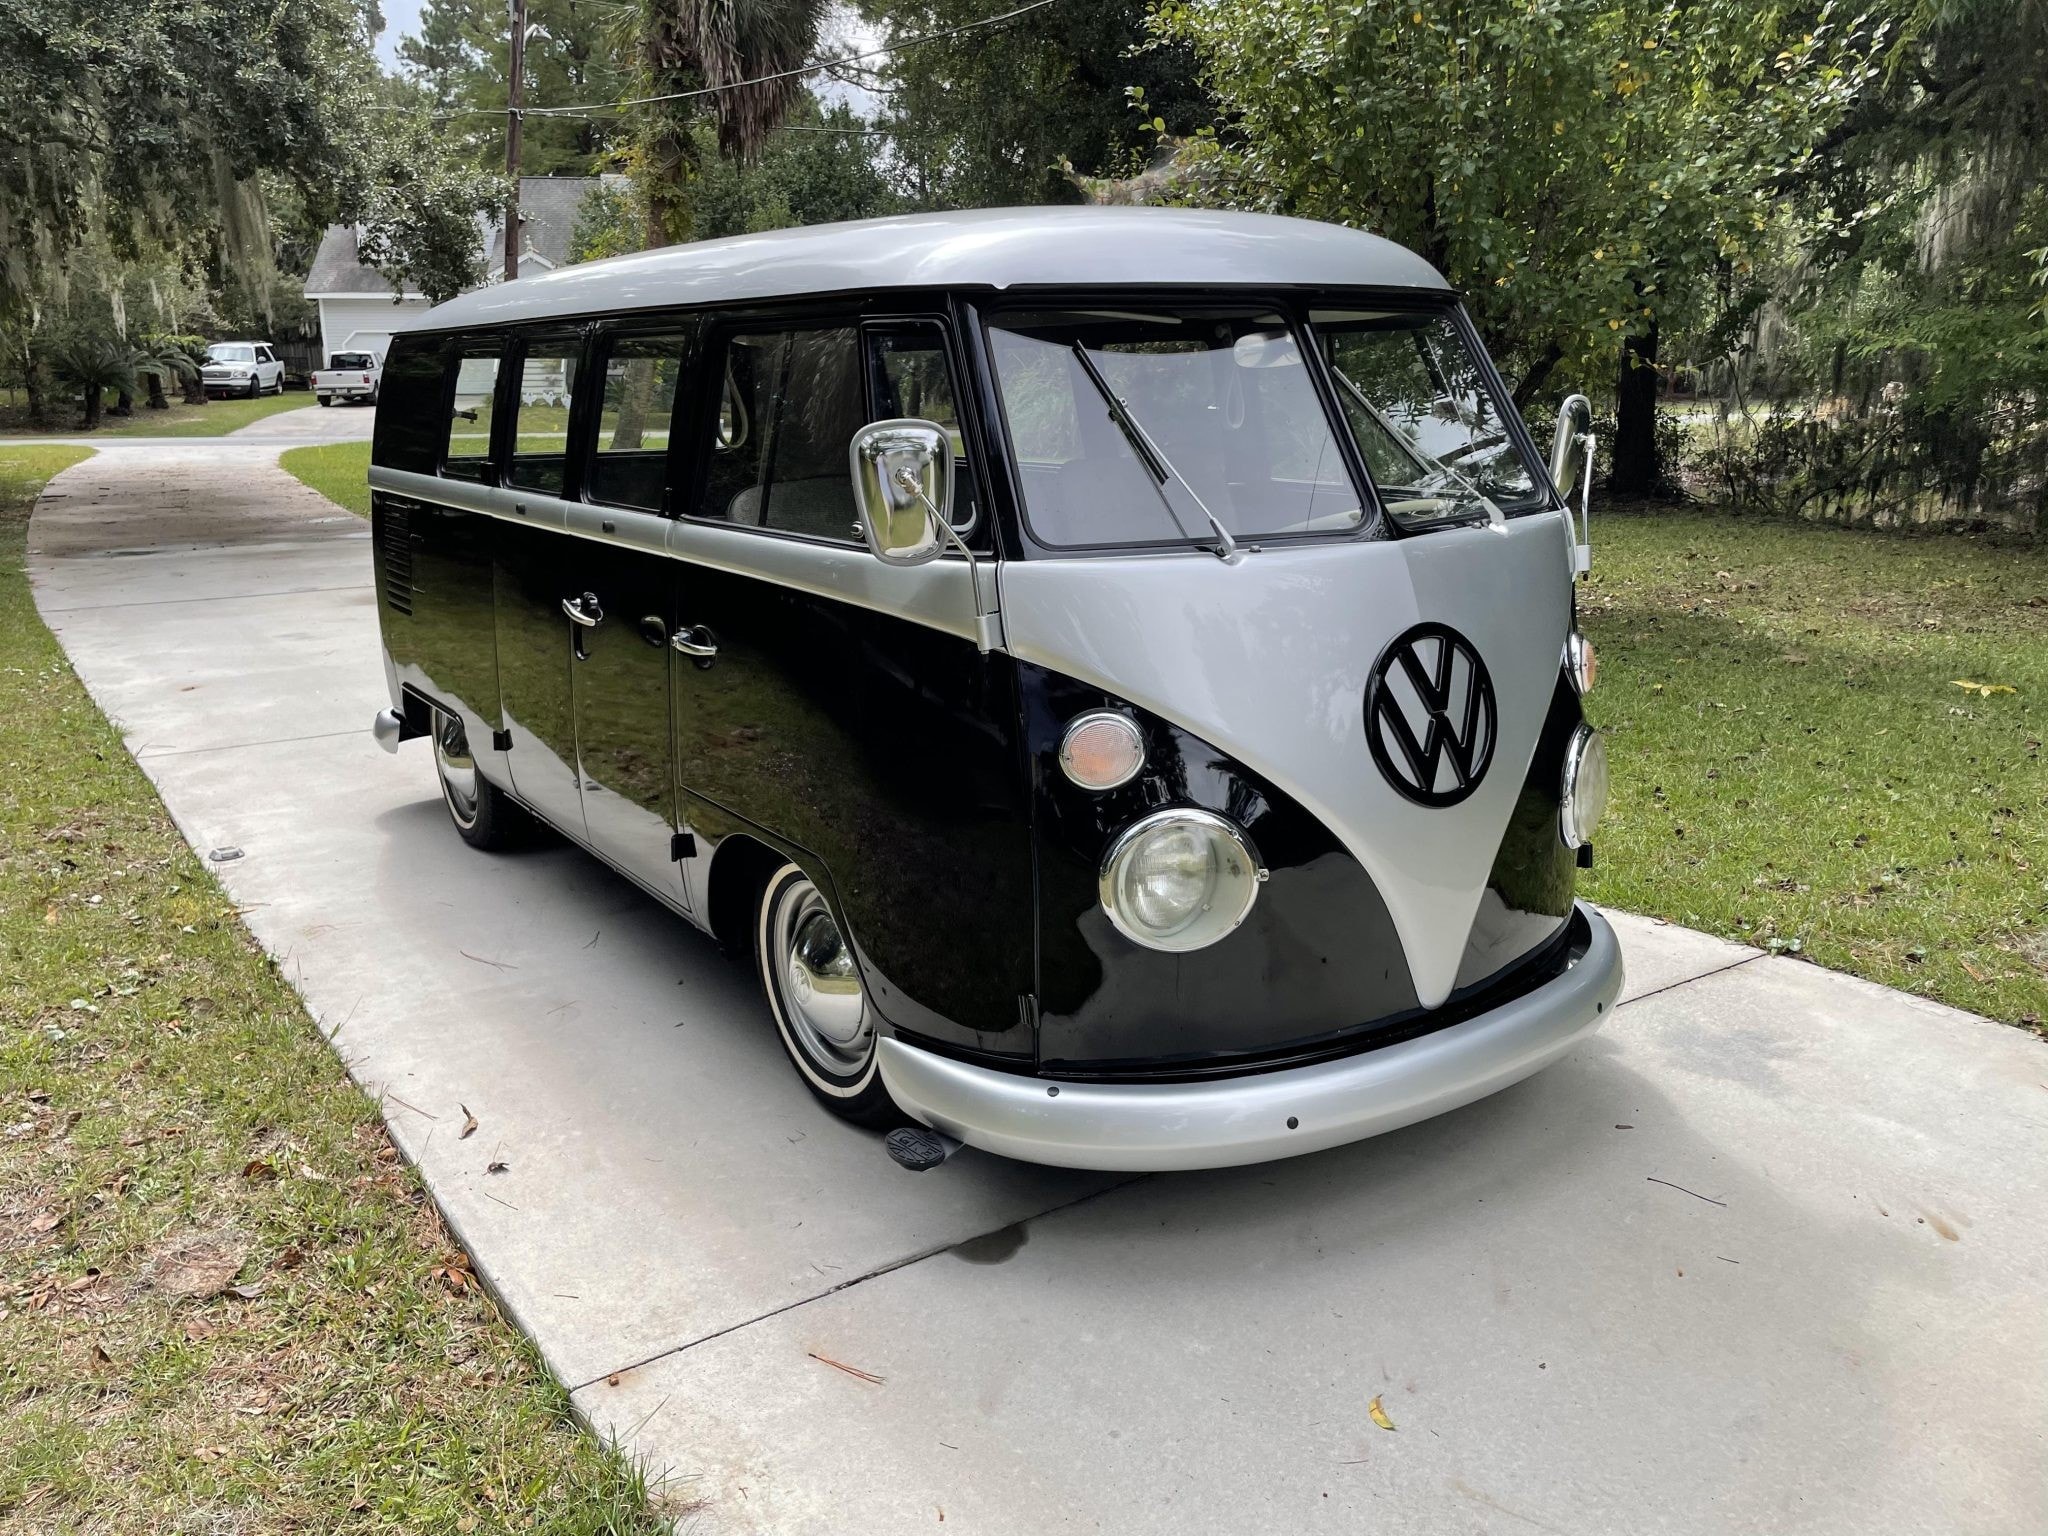 This Volkswagen Kombi Is A Classic Van Restored To Its Former Glory